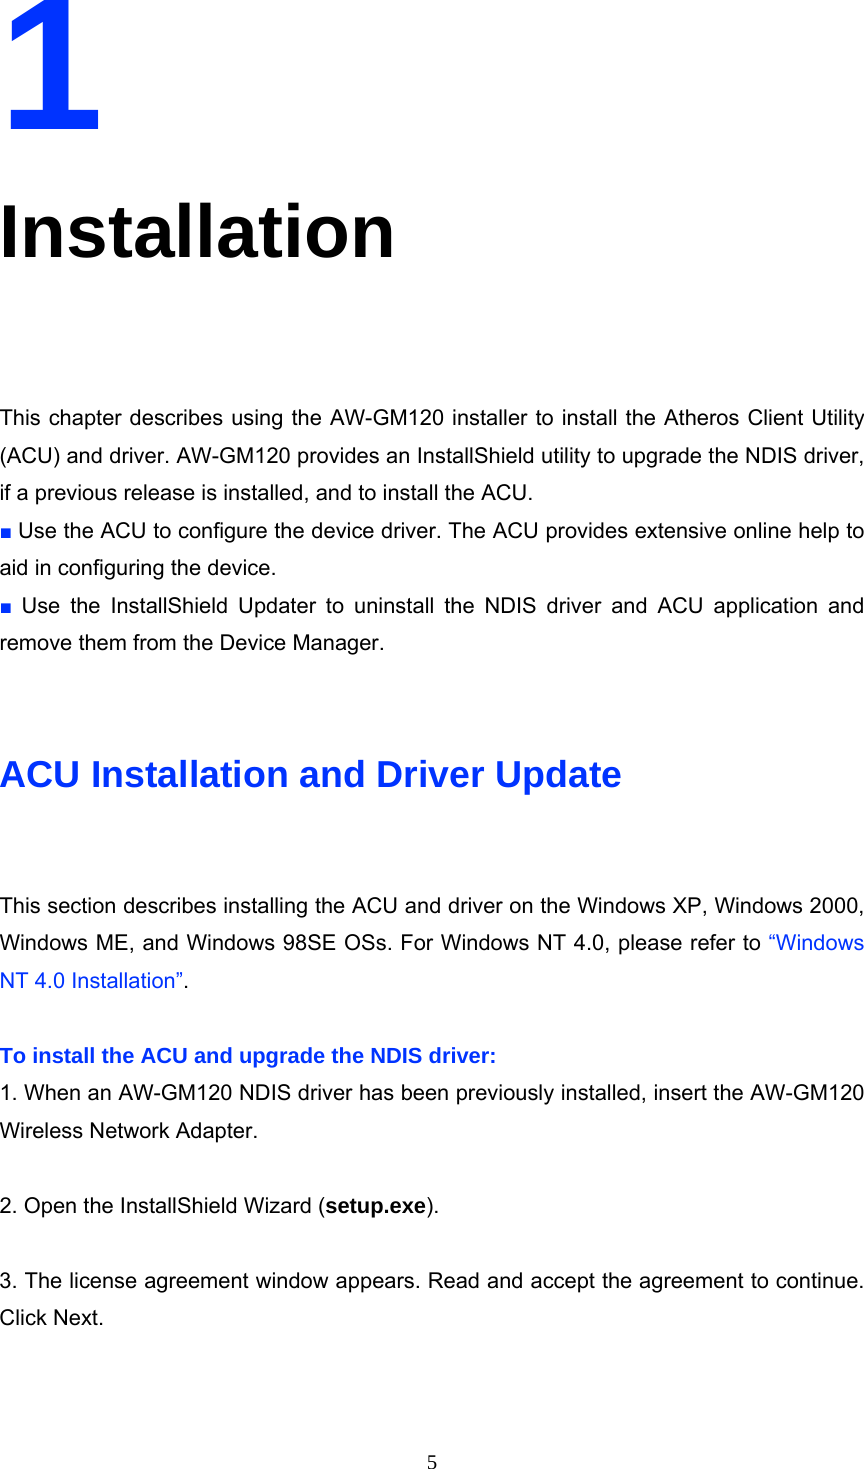  51 Installation  This chapter describes using the AW-GM120 installer to install the Atheros Client Utility (ACU) and driver. AW-GM120 provides an InstallShield utility to upgrade the NDIS driver, if a previous release is installed, and to install the ACU. ■ Use the ACU to configure the device driver. The ACU provides extensive online help to aid in configuring the device. ■ Use the InstallShield Updater to uninstall the NDIS driver and ACU application and remove them from the Device Manager.   ACU Installation and Driver Update  This section describes installing the ACU and driver on the Windows XP, Windows 2000, Windows ME, and Windows 98SE OSs. For Windows NT 4.0, please refer to “Windows NT 4.0 Installation”.  To install the ACU and upgrade the NDIS driver: 1. When an AW-GM120 NDIS driver has been previously installed, insert the AW-GM120 Wireless Network Adapter.  2. Open the InstallShield Wizard (setup.exe).  3. The license agreement window appears. Read and accept the agreement to continue. Click Next. 